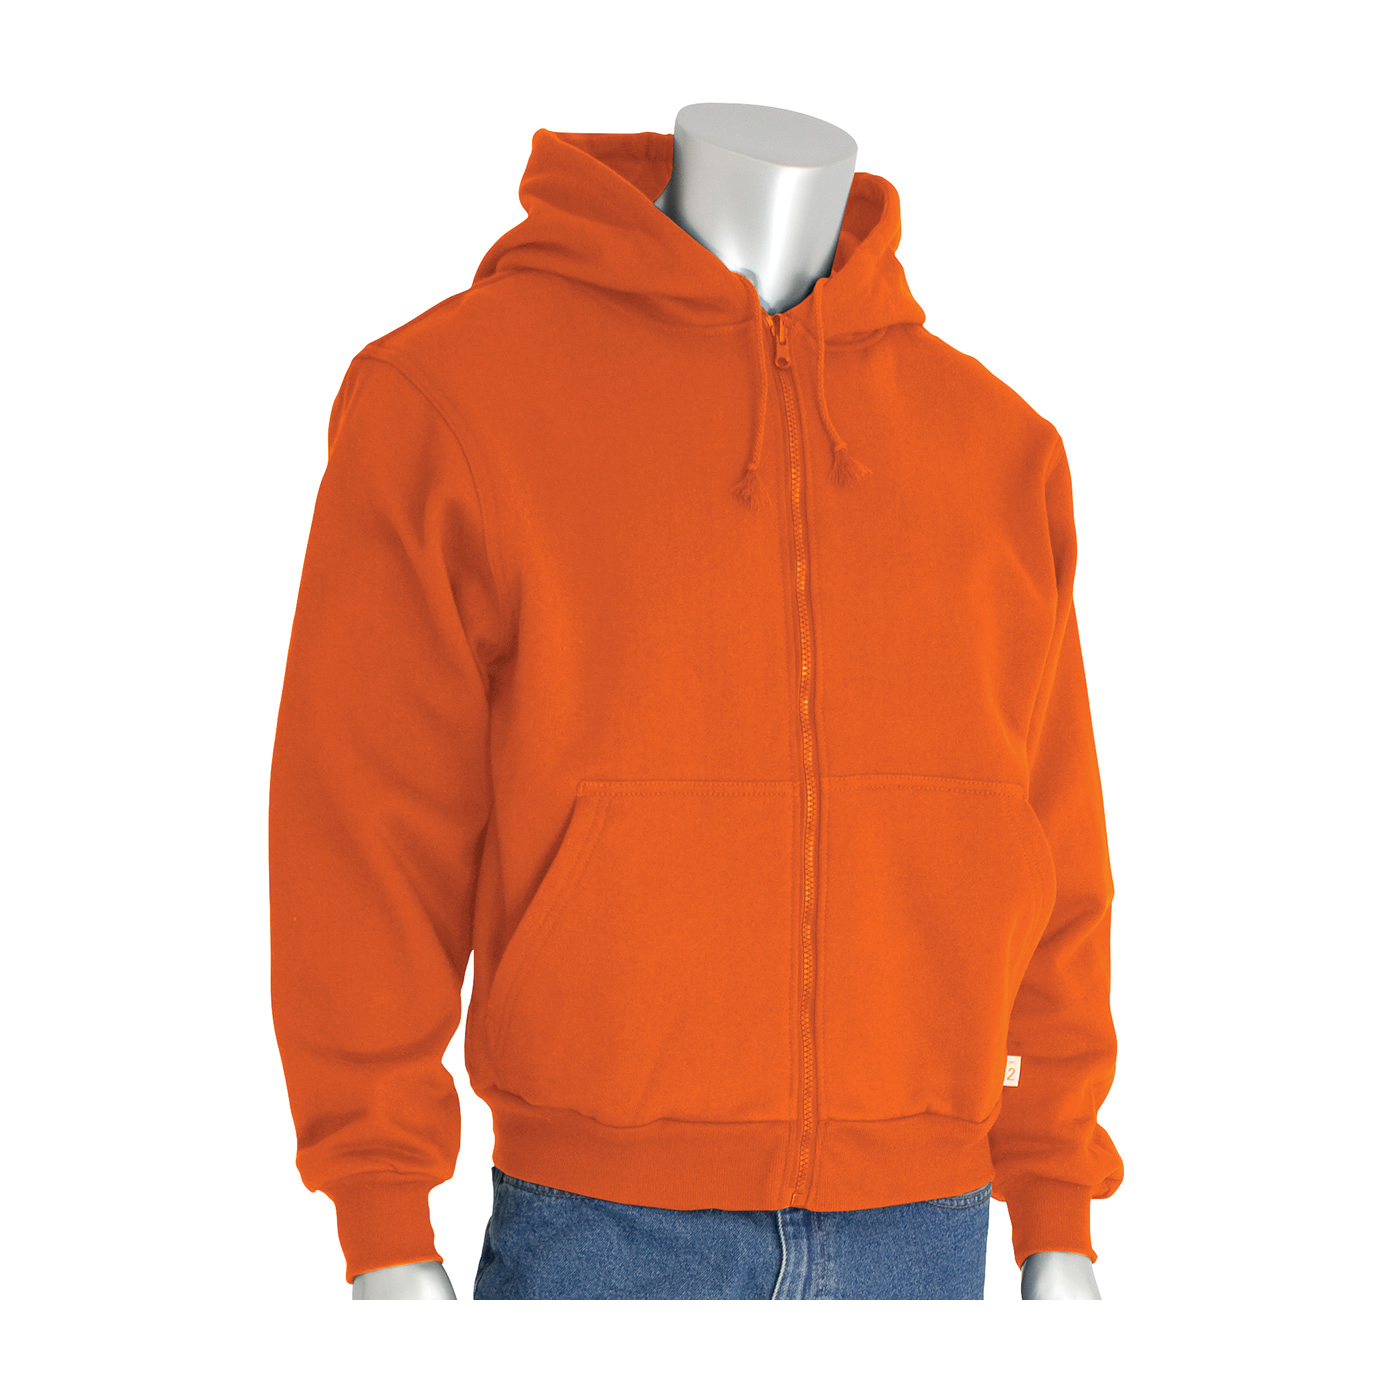 PIP® 385-FRZH-OR/M Polartec® 385-FRZH Arc and Flame Resistant Sweatshirt, M, Orange, FR Fleece Knit/100% Cotton, 27-1/2 in Regular, 28-1/2 in Tall L